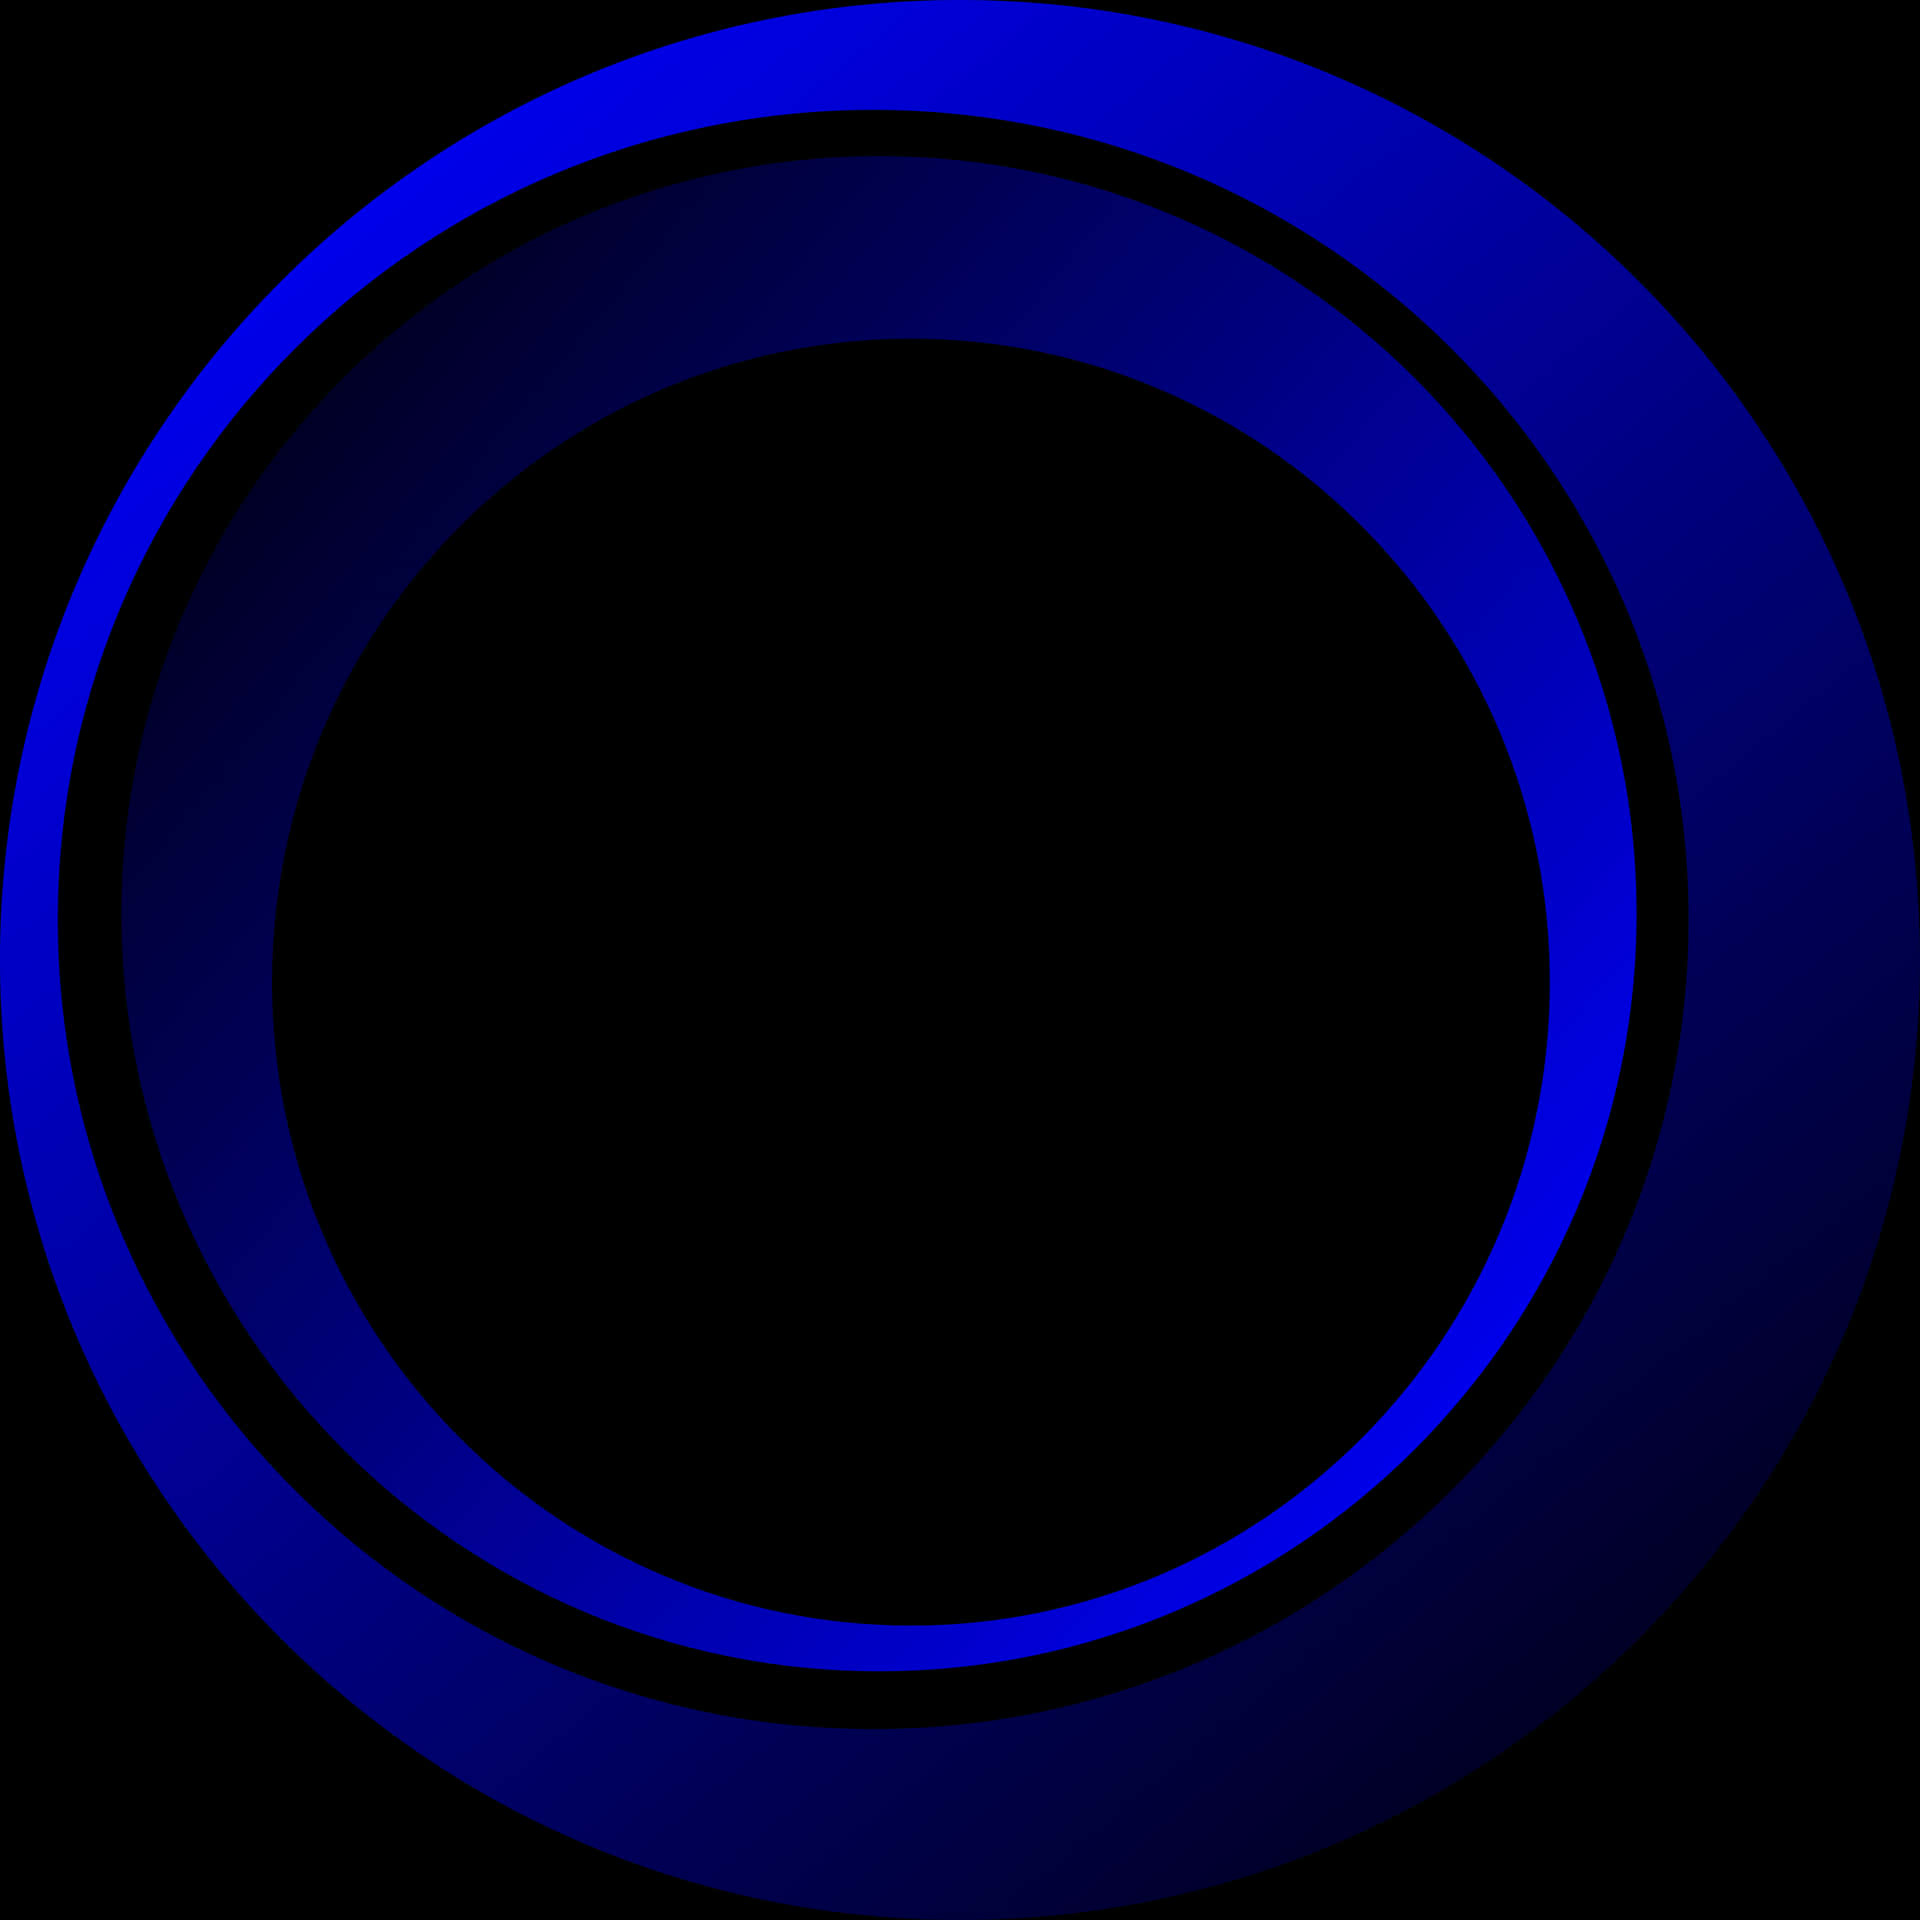 Abstract Blue Circles Graphic PNG